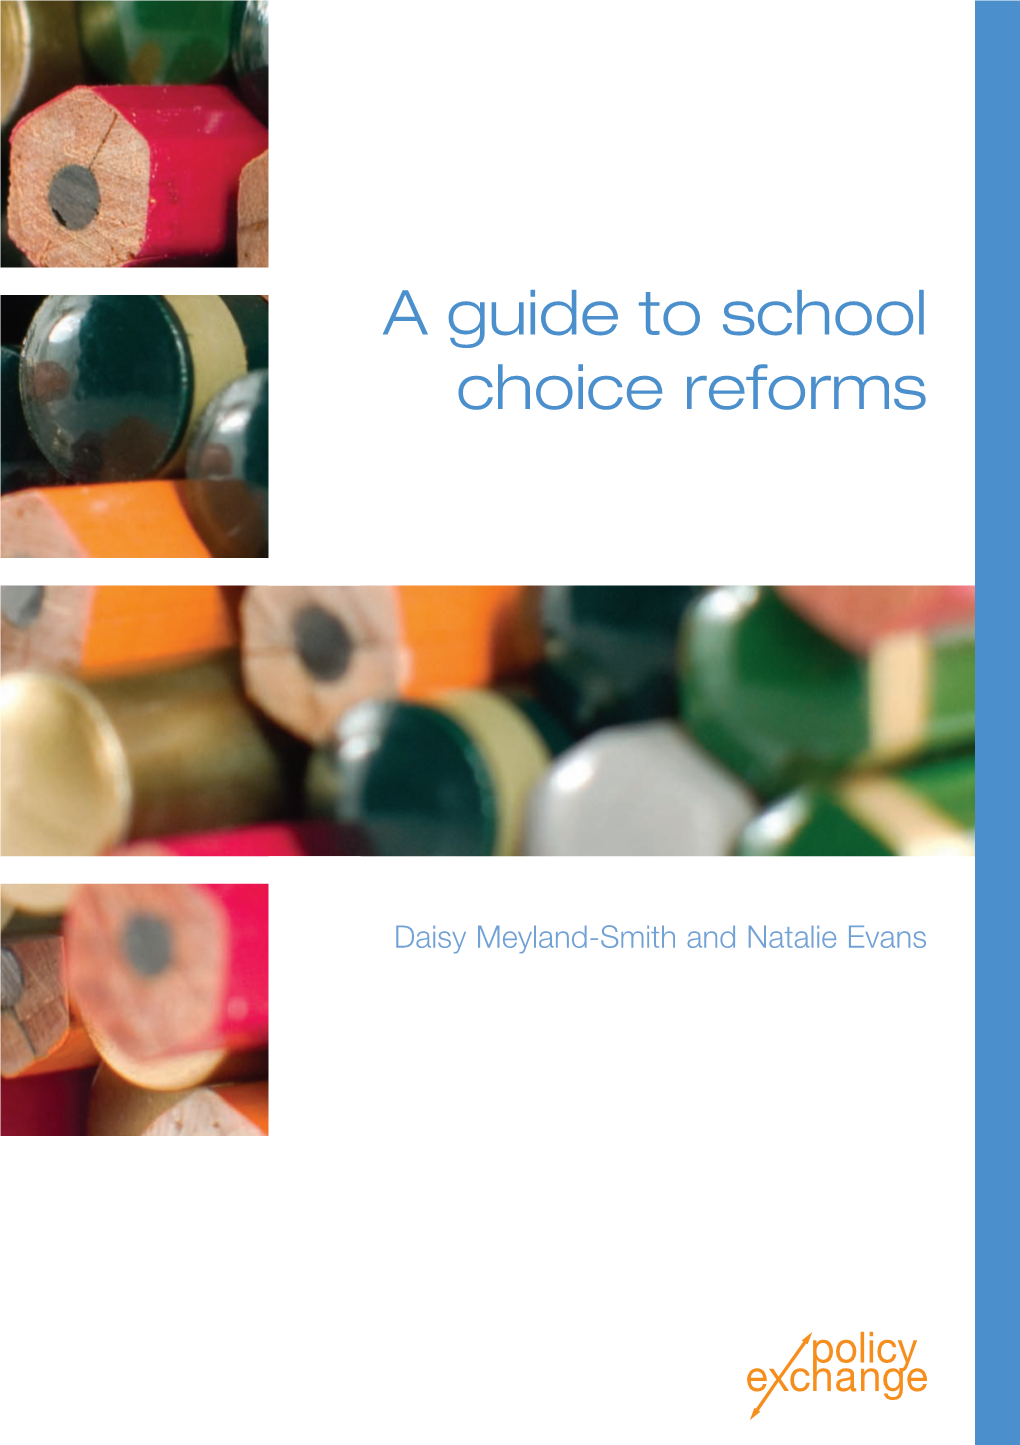 A Guide to School Choice Reforms Reforms Choice School to Guide a Schools) and the US (Charter Schools)